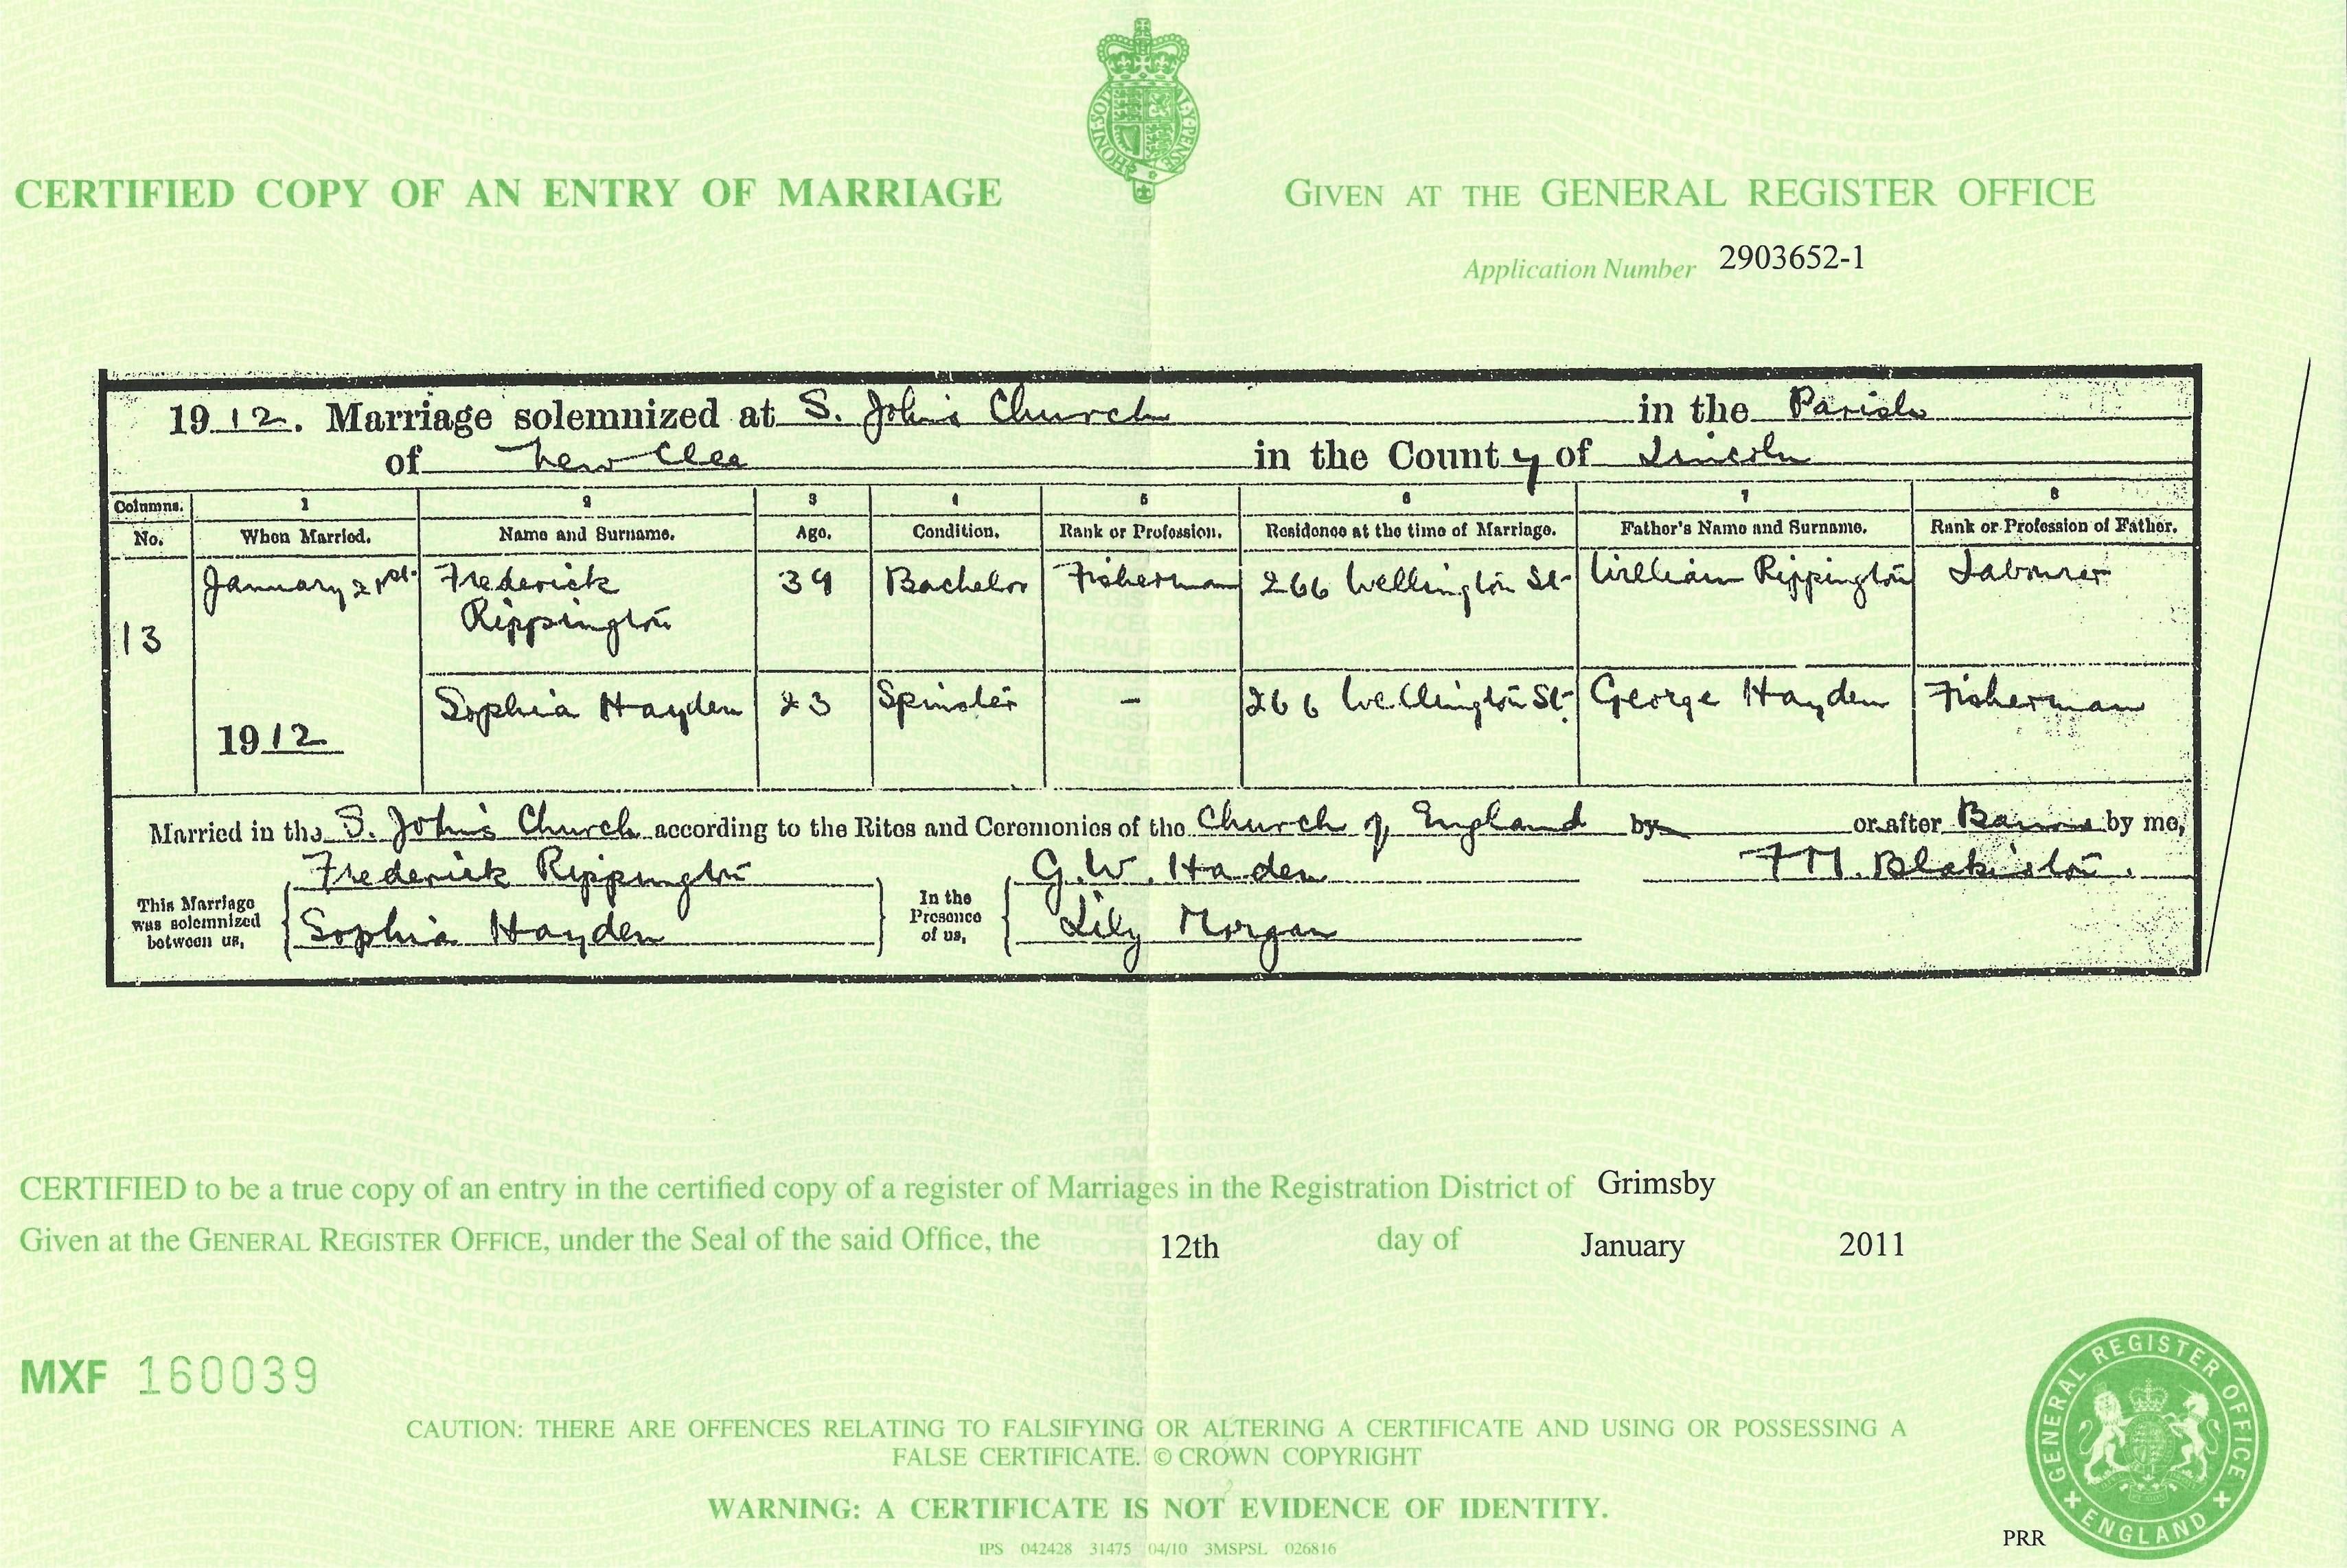 i-was-adopted-how-can-i-get-a-copy-of-my-birth-certificate-blog-vitalcertificates-co-uk